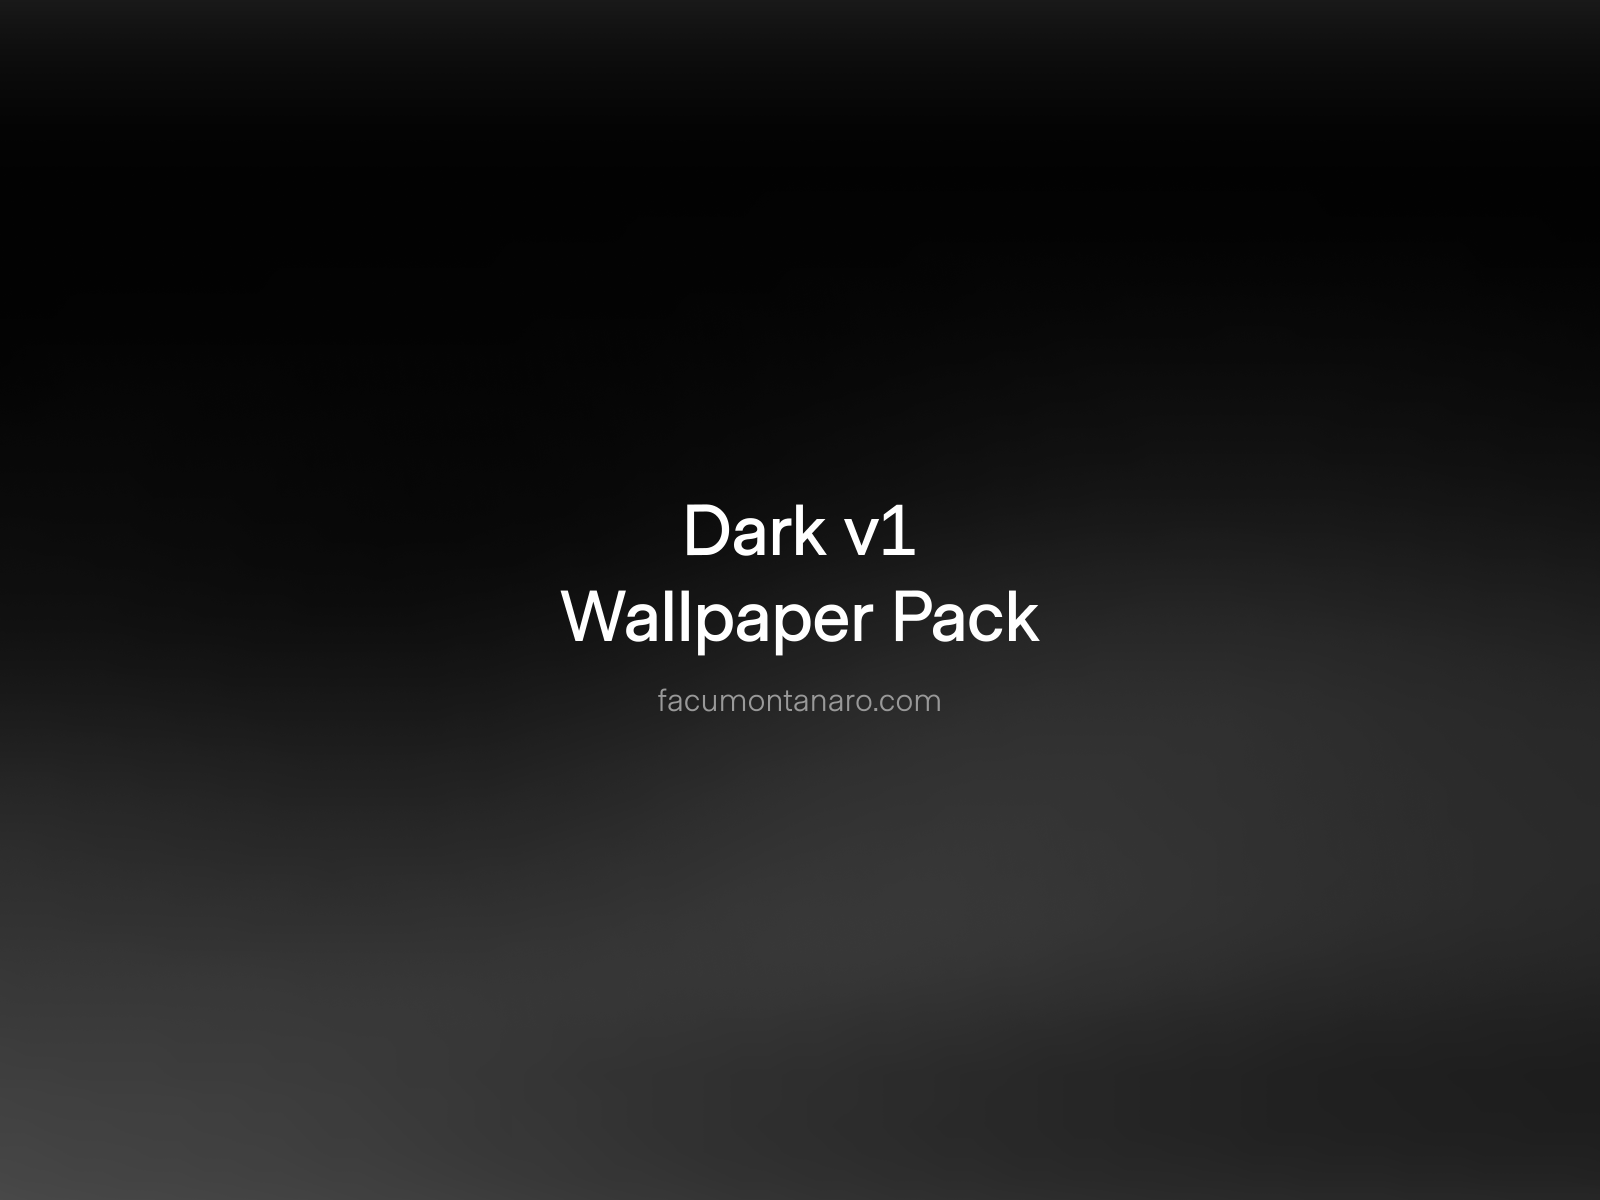 Dark v1 - Wallpapers Pack by Facu Montanaro on Dribbble